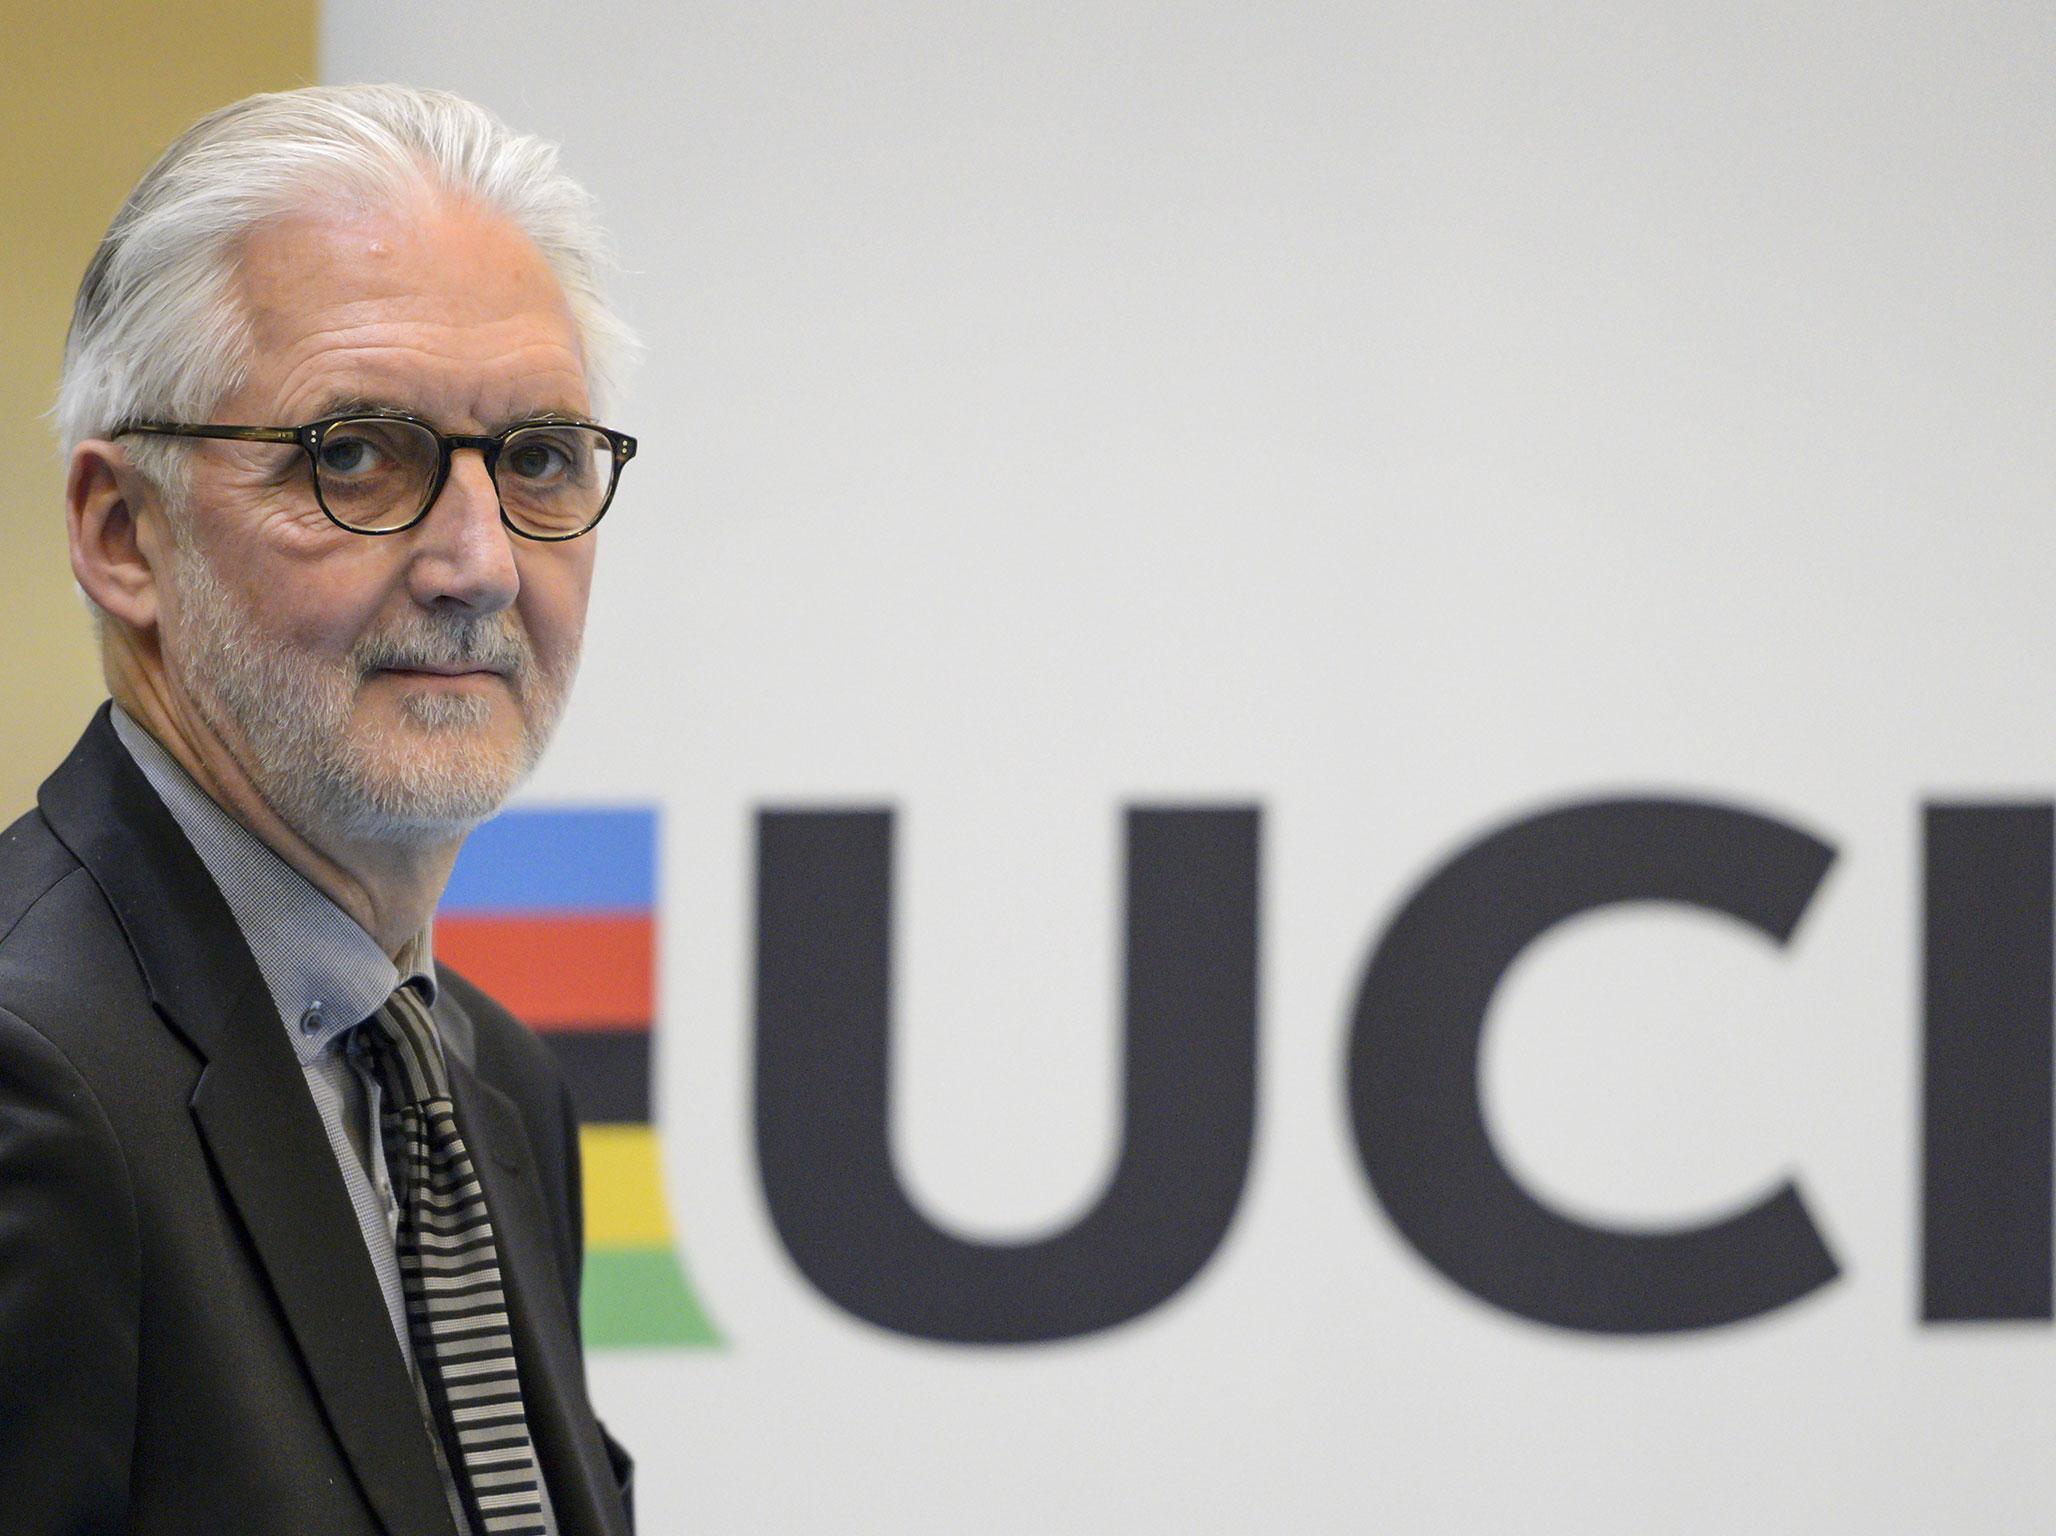 Brian Cookson is out as UCI president after a single term